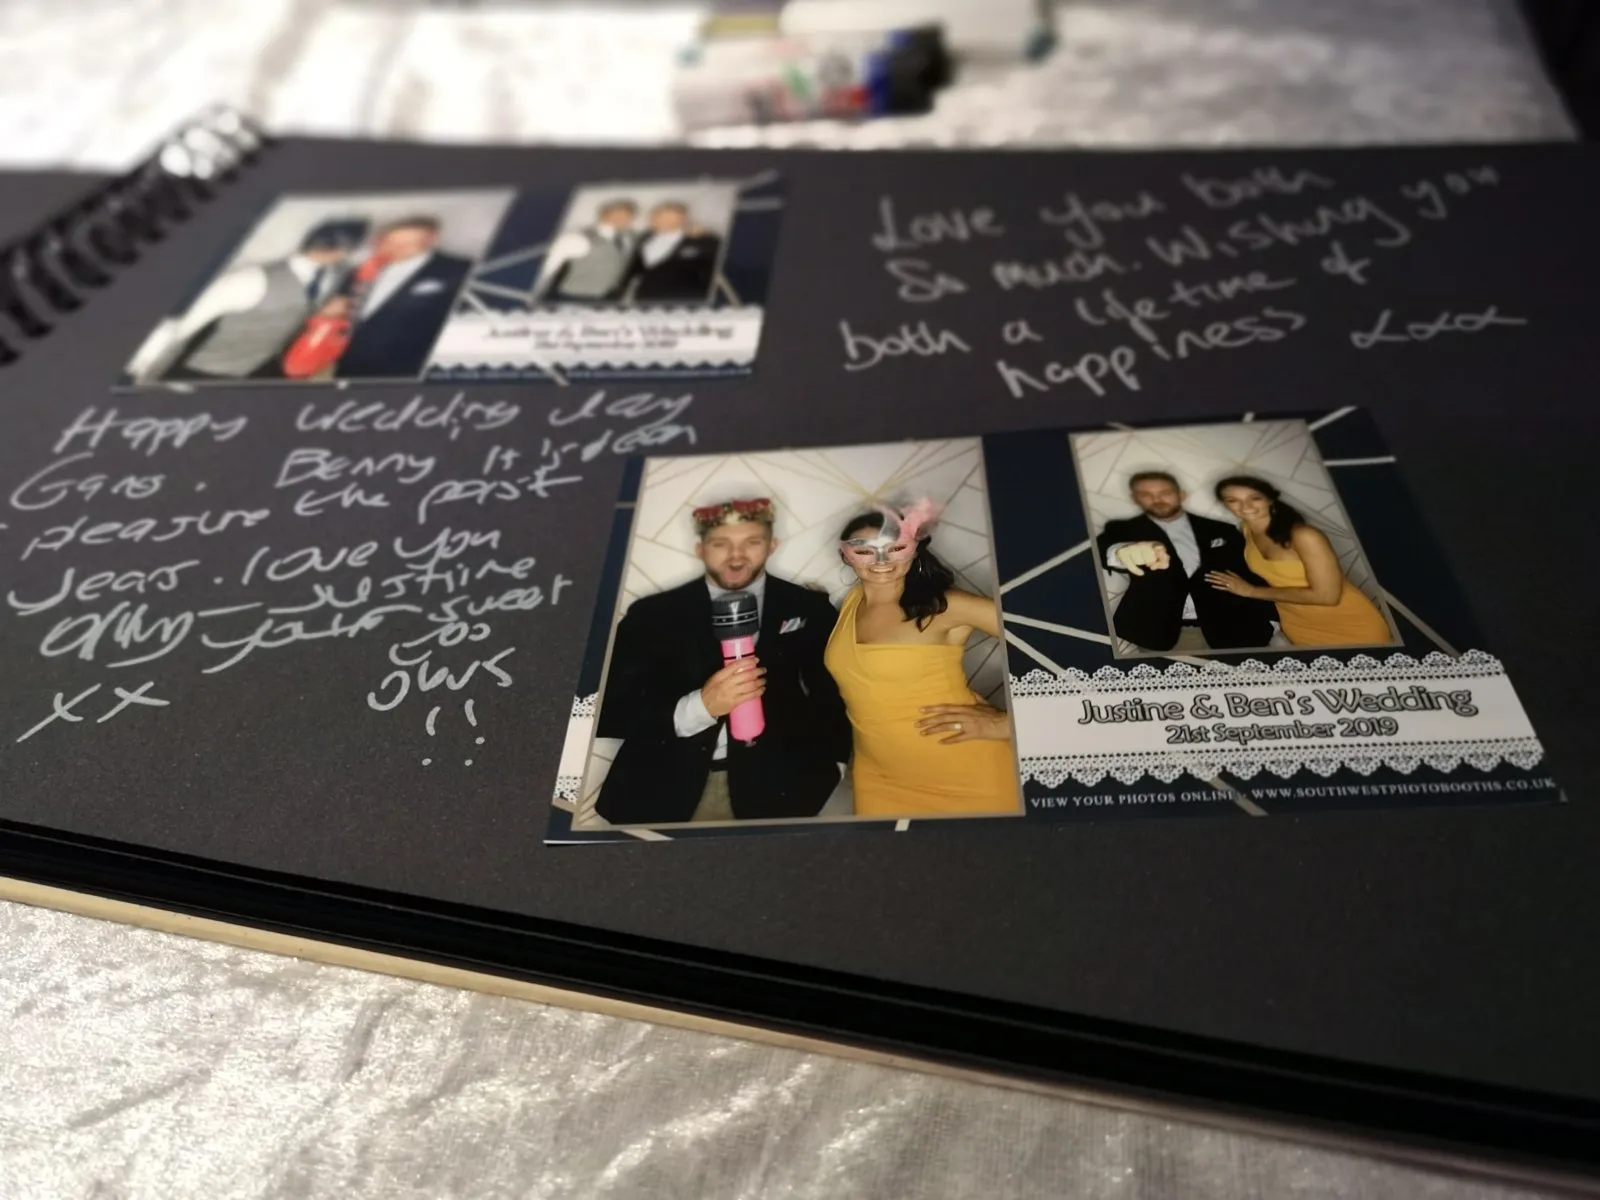 Photo Booth Photo Album - for Wedding or Party- Holds 120 Photobooth 2x6 Photo Strips - Slide in, Black